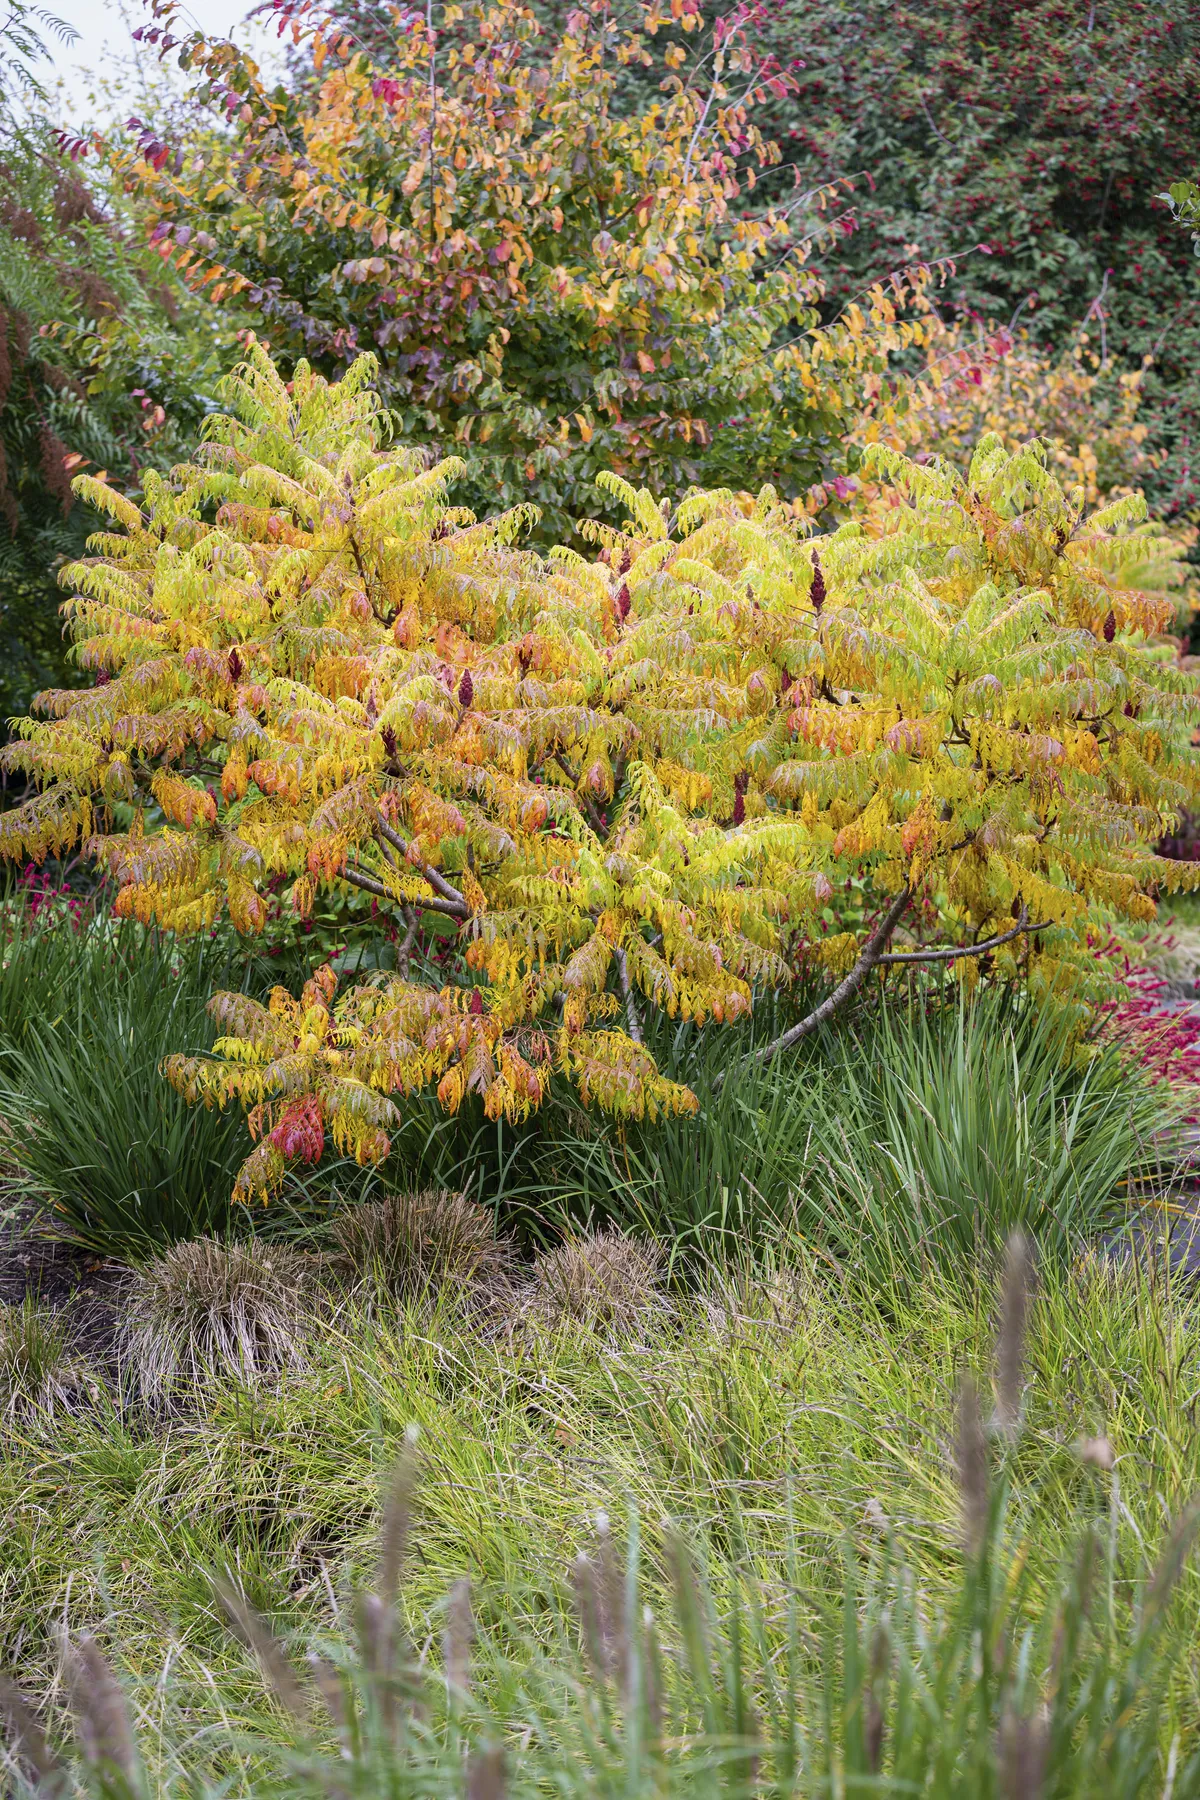 A trio of Rhus typhina ‘Dissecta’ already existed to the side of this sloping site and their intense autumn colour is picked up all over the garden, including in the pair of multi-stemmed Parrotia persica behind them.